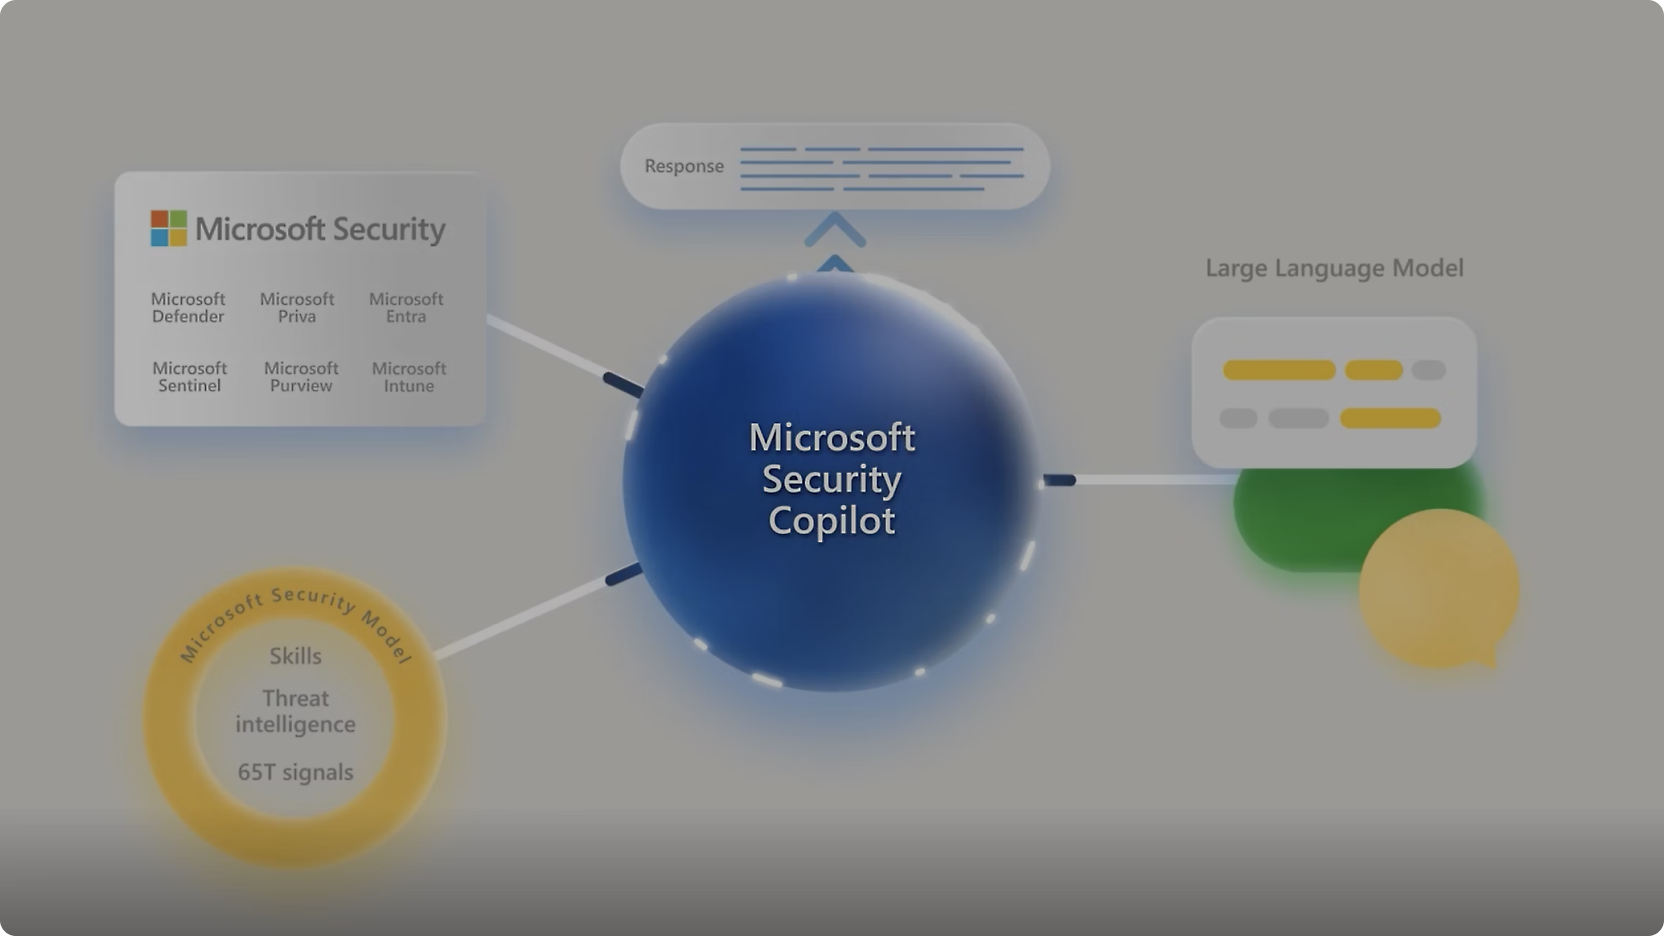 Diagram showing "Microsoft Security Copilot" at the center with connections to various microsoft security tools